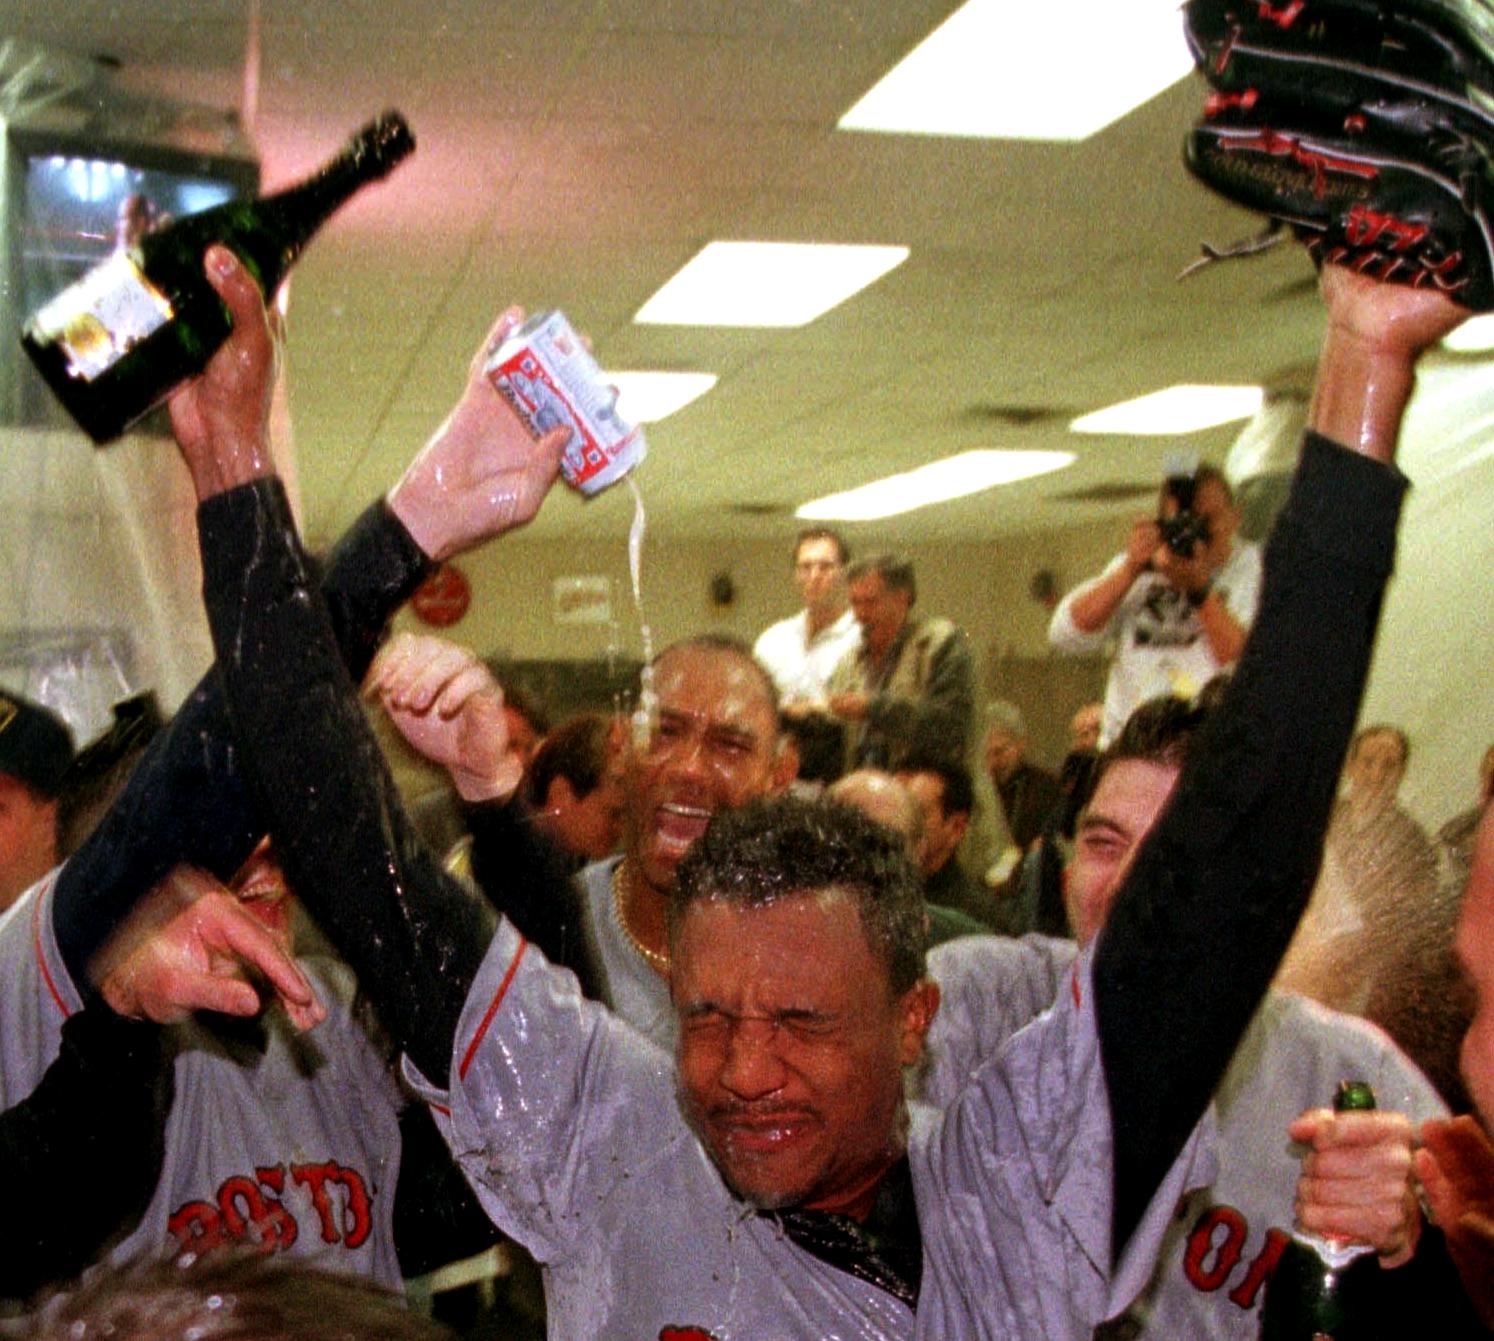 Pedro Martinez celebrates after defeating the Indians in the 1999 ALDS. (Photo by Jeff Kowalsky/AFP/Getty Images)